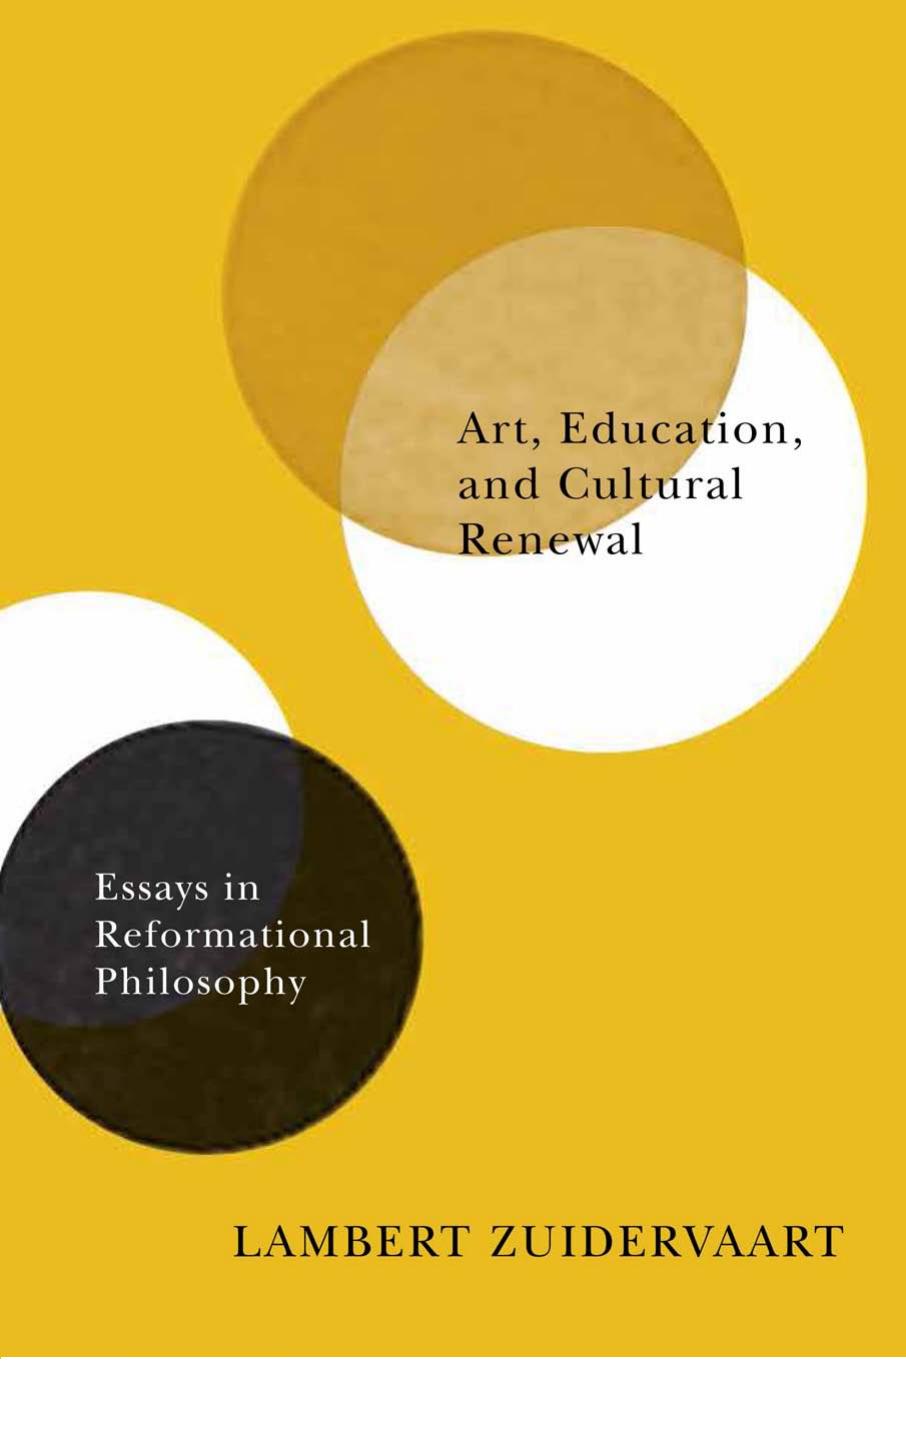 Art, Education, and Cultural Renewal: Essays in Reformational Philosophy